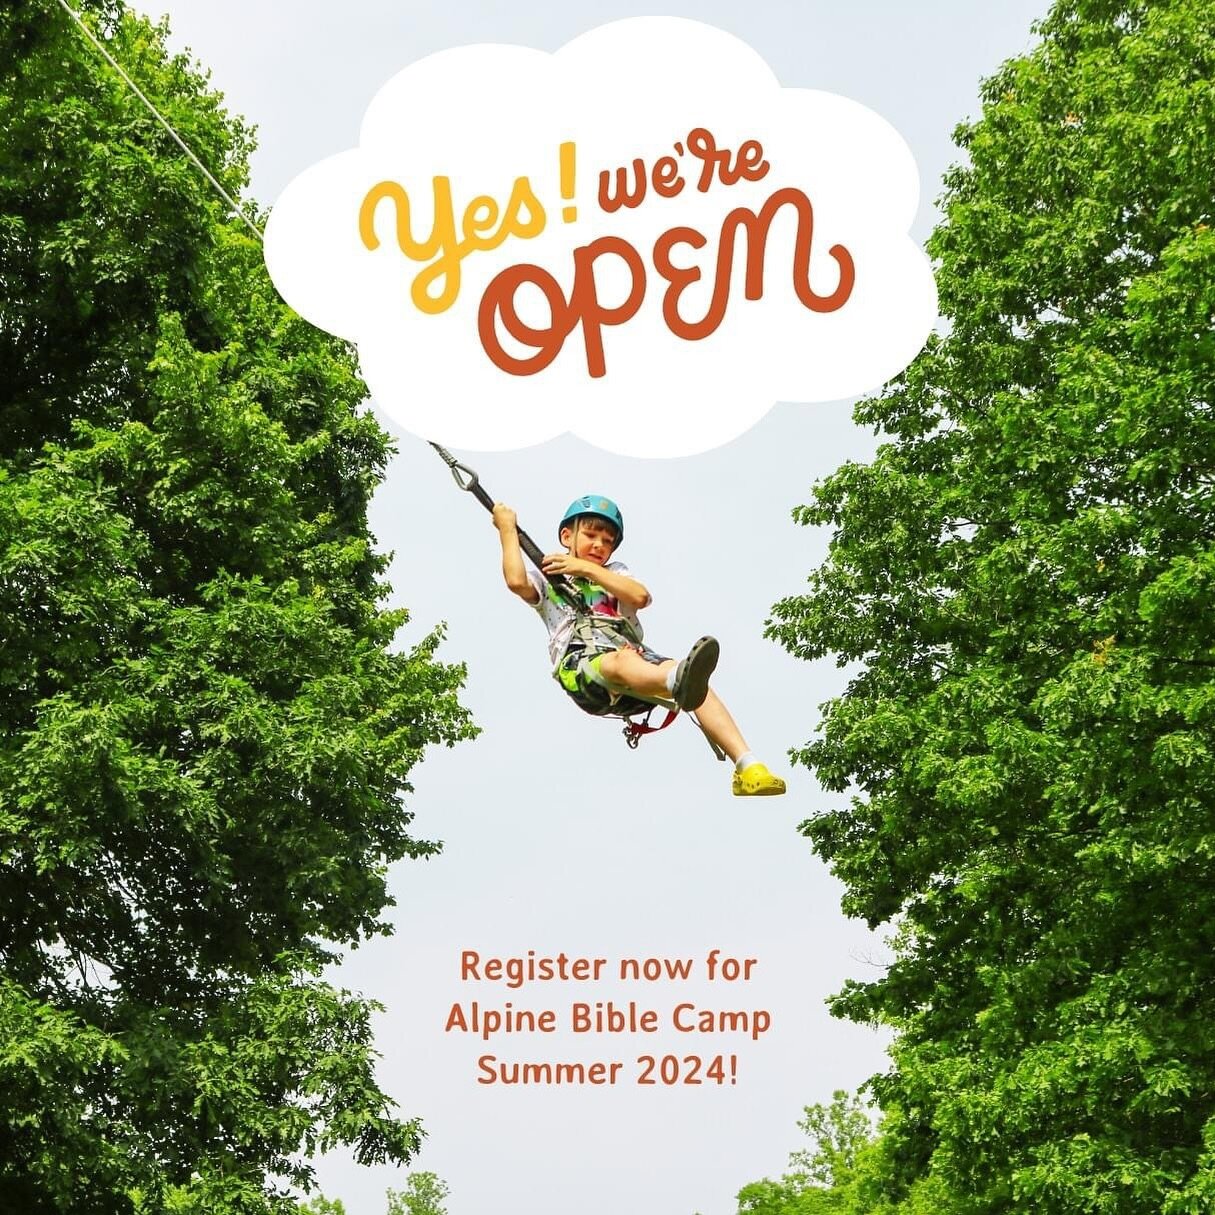 Swinging by to say... registration is open for Alpine Bible Camp!

From age 5 to high school grads, we&rsquo;ve got something for every kid. Check out the options and reserve your spot soon! Follow the link in our bio and select Summer Camp.

#alpine